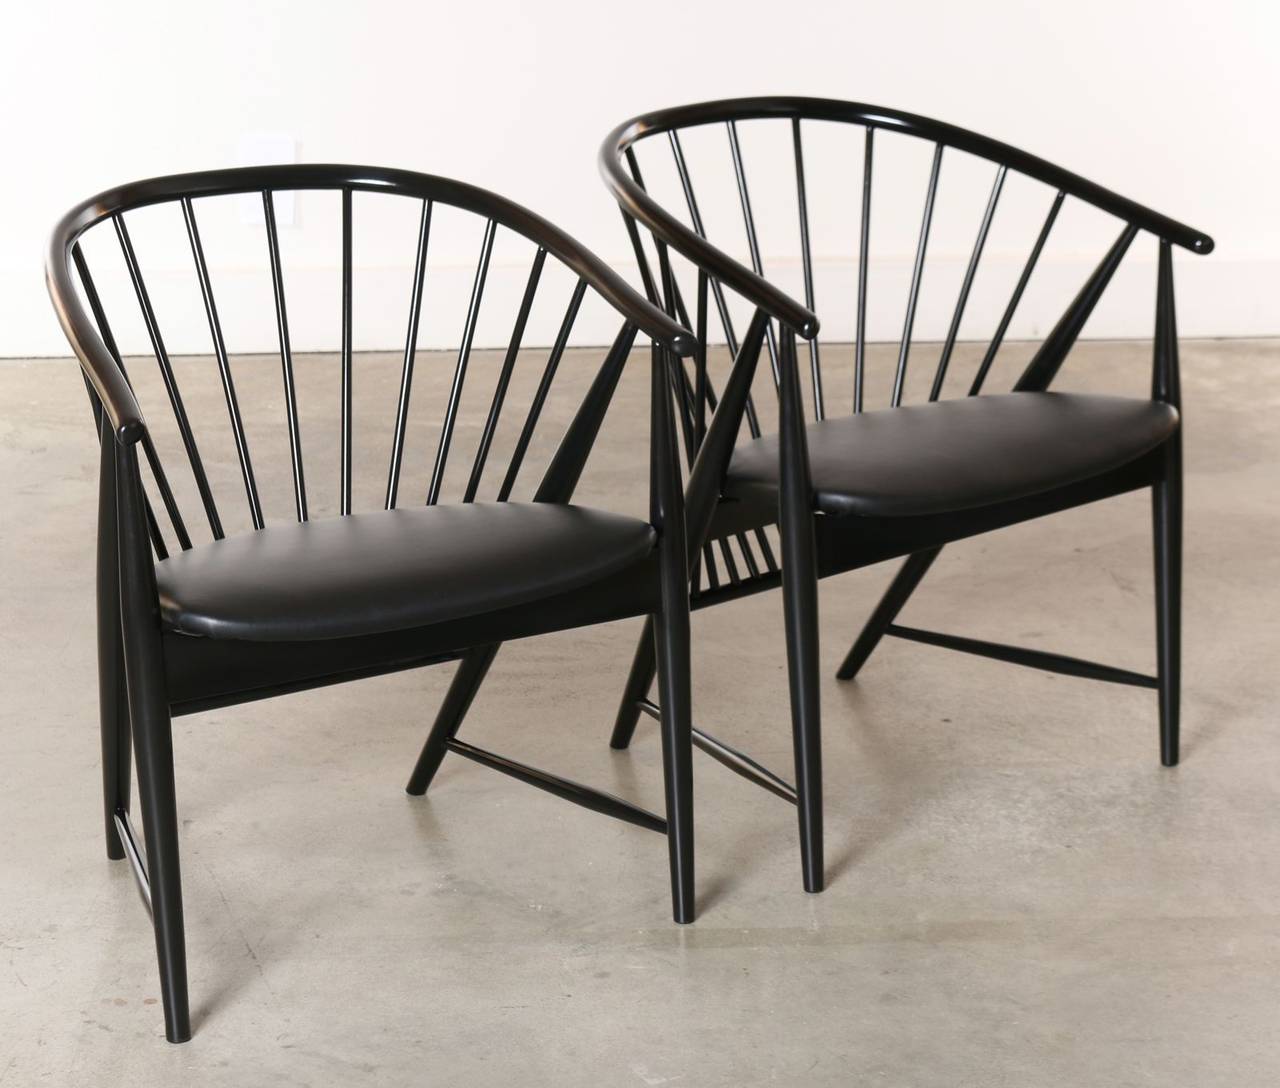 Created by Swedish designer Sonna Rosen for Nassjo Stolfabrik in 1948. This chair received its name from the solid beechwood spindles and shapely frames that fan into an elegant sun feather design. A work of art viewable from every angle. This pair